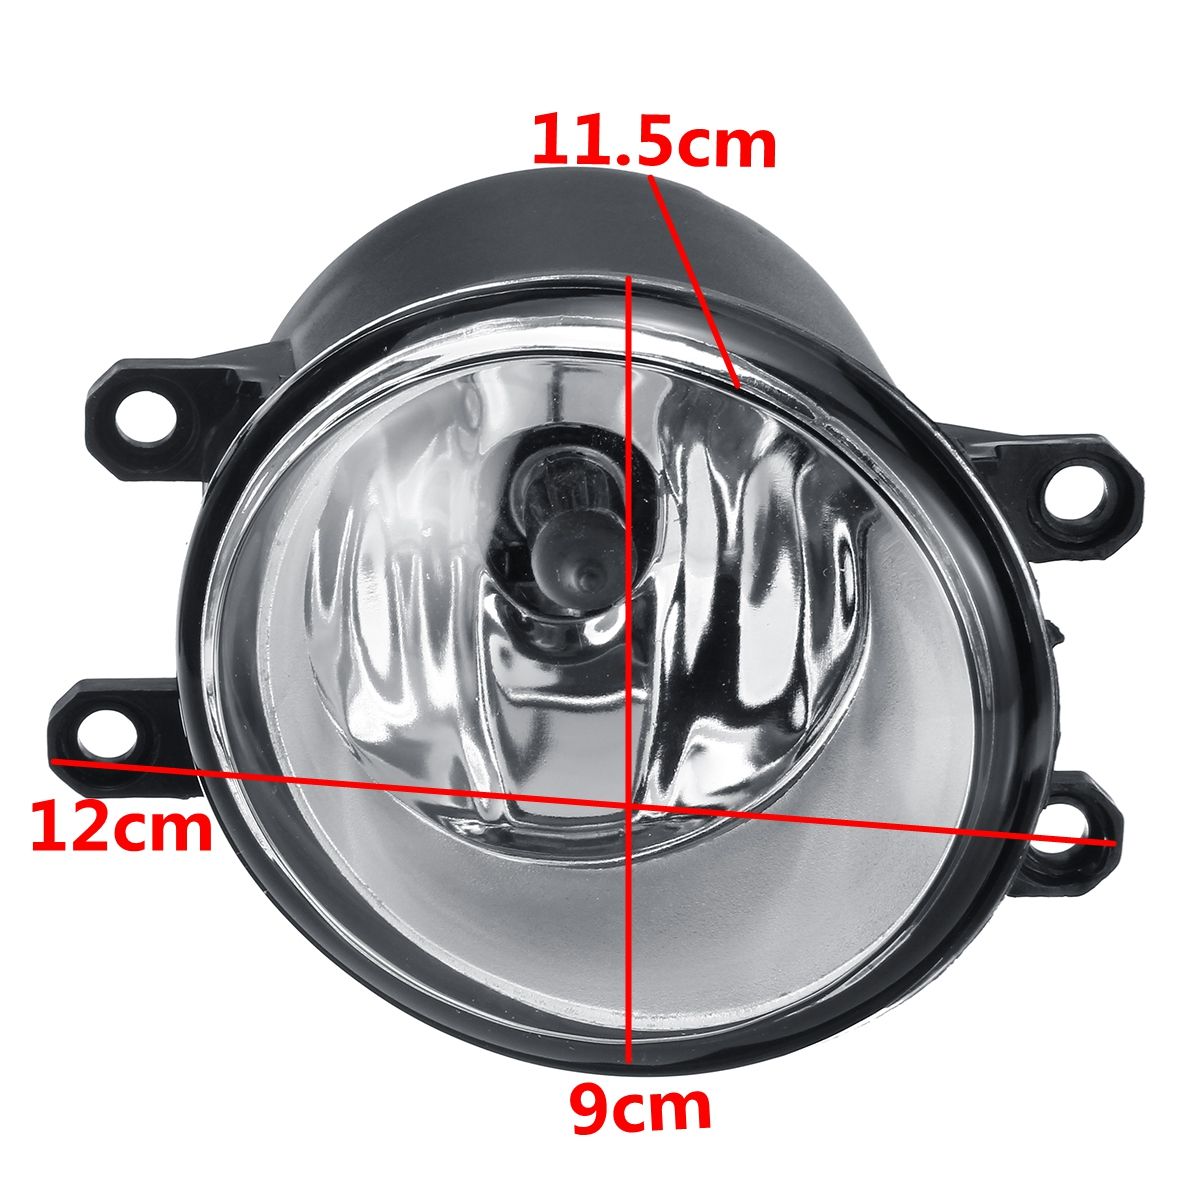 Universal-Front-Bumper-Fog-Light-Lamp-with-H11-Bulb-For-Toyota-Sienna-Camry-Corolla-Highlander-Prius-1730165